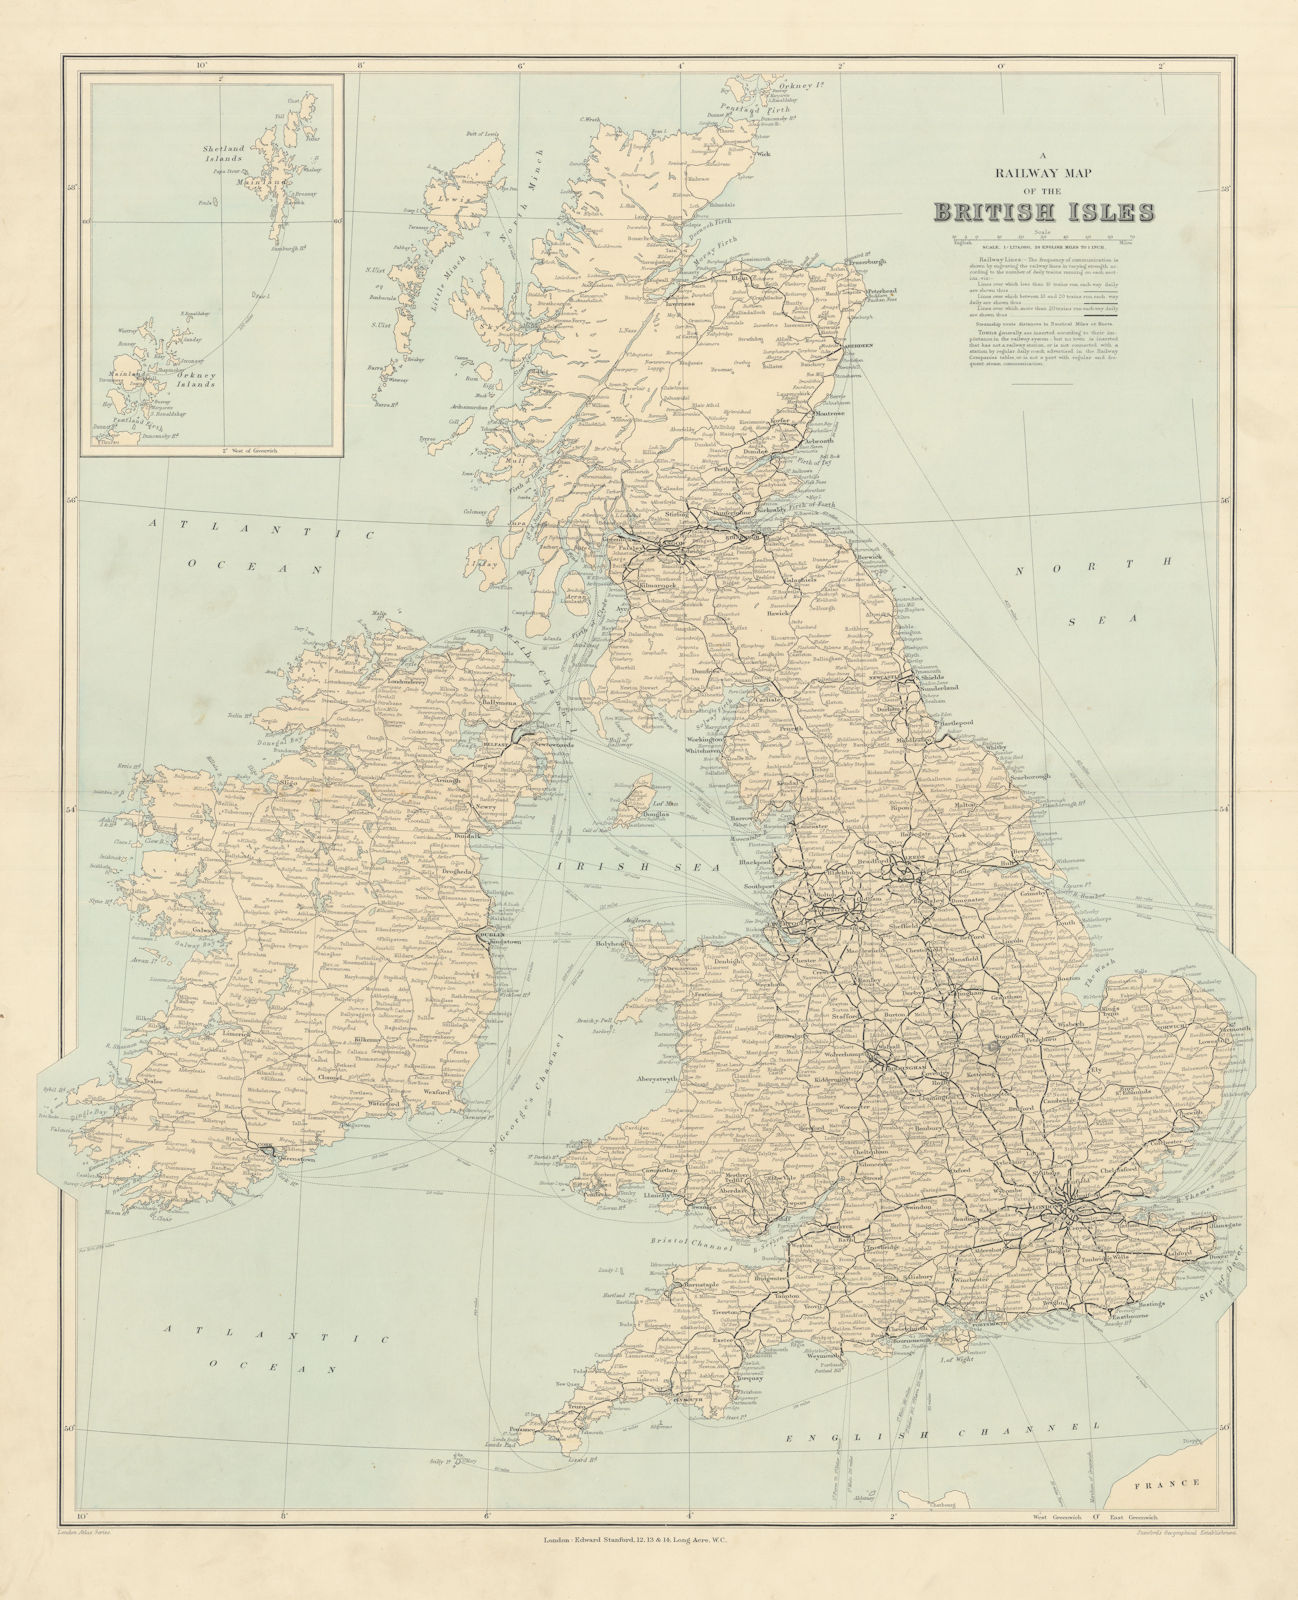 Associate Product Railway map of the British Isles. England Ireland Scotland Wales. STANFORD 1904